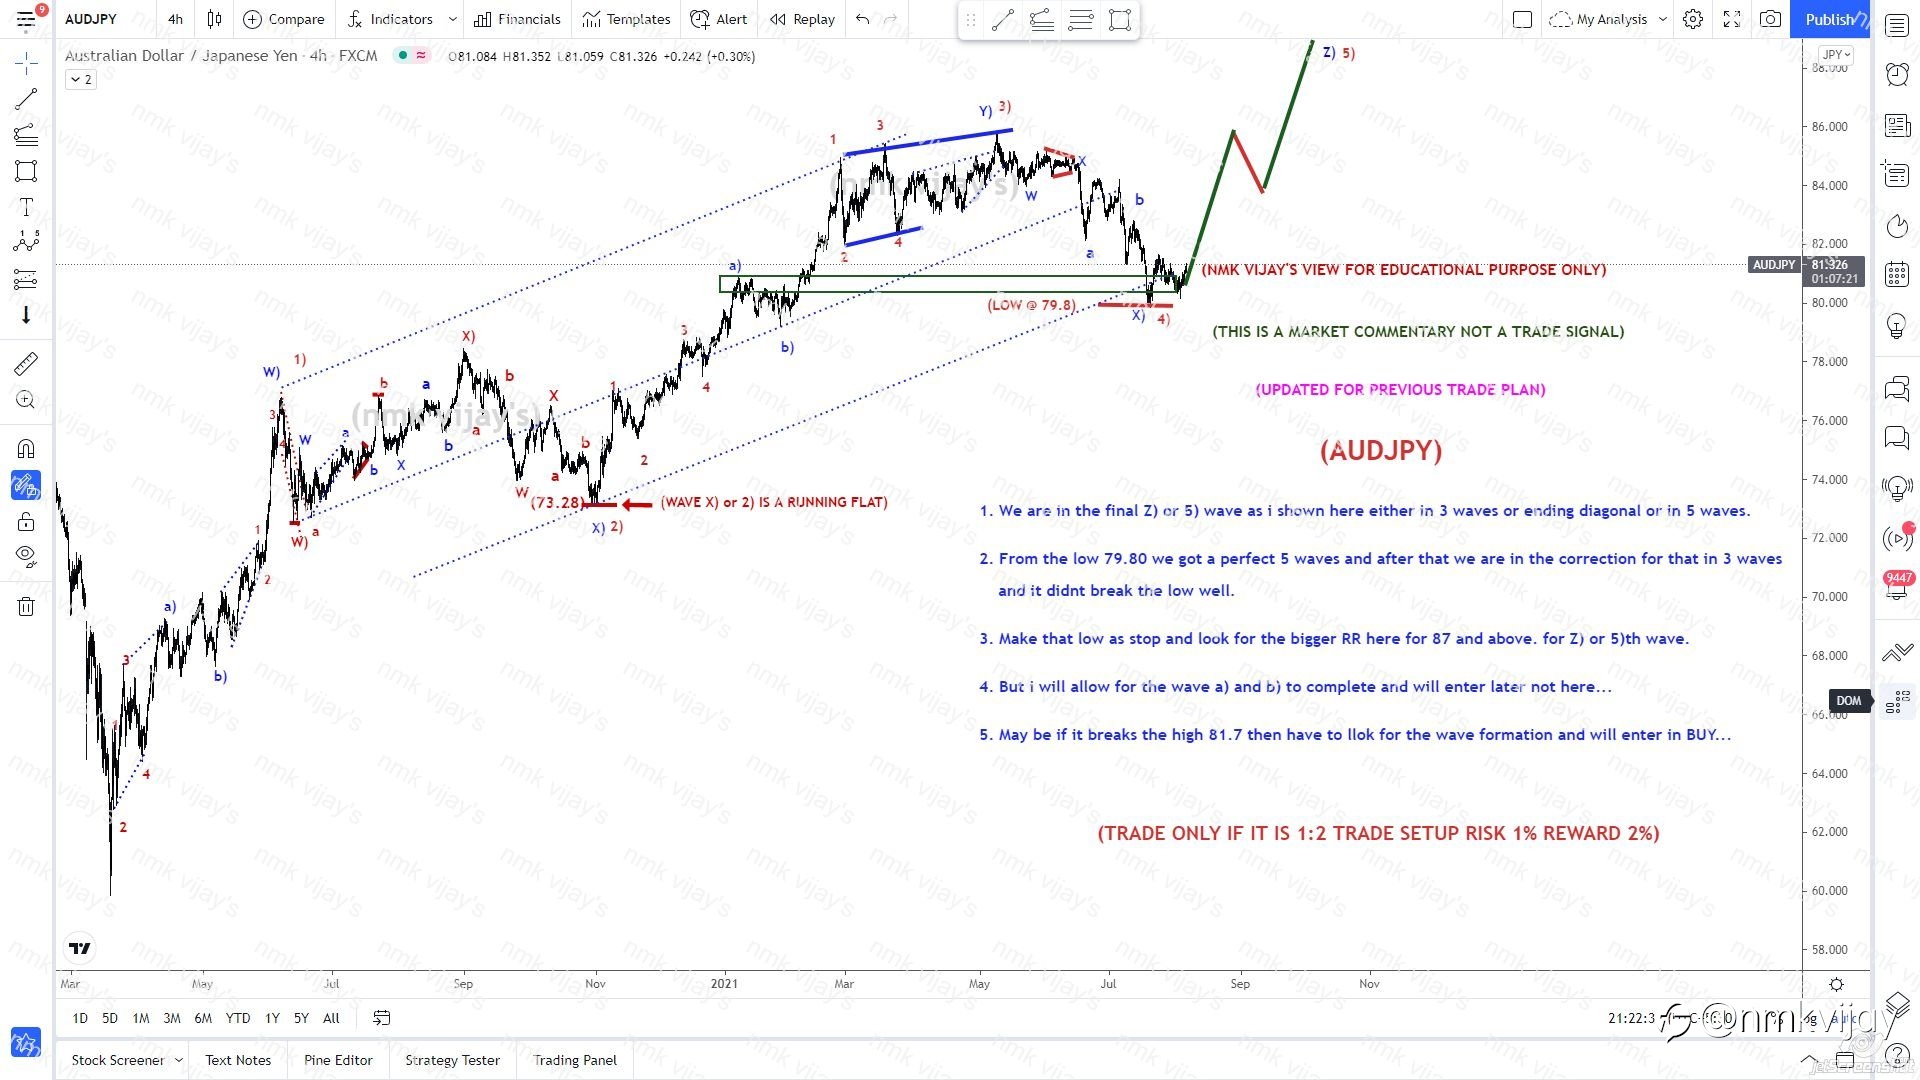 AUDJPY-Making a low as STOP target for 87 and above...?